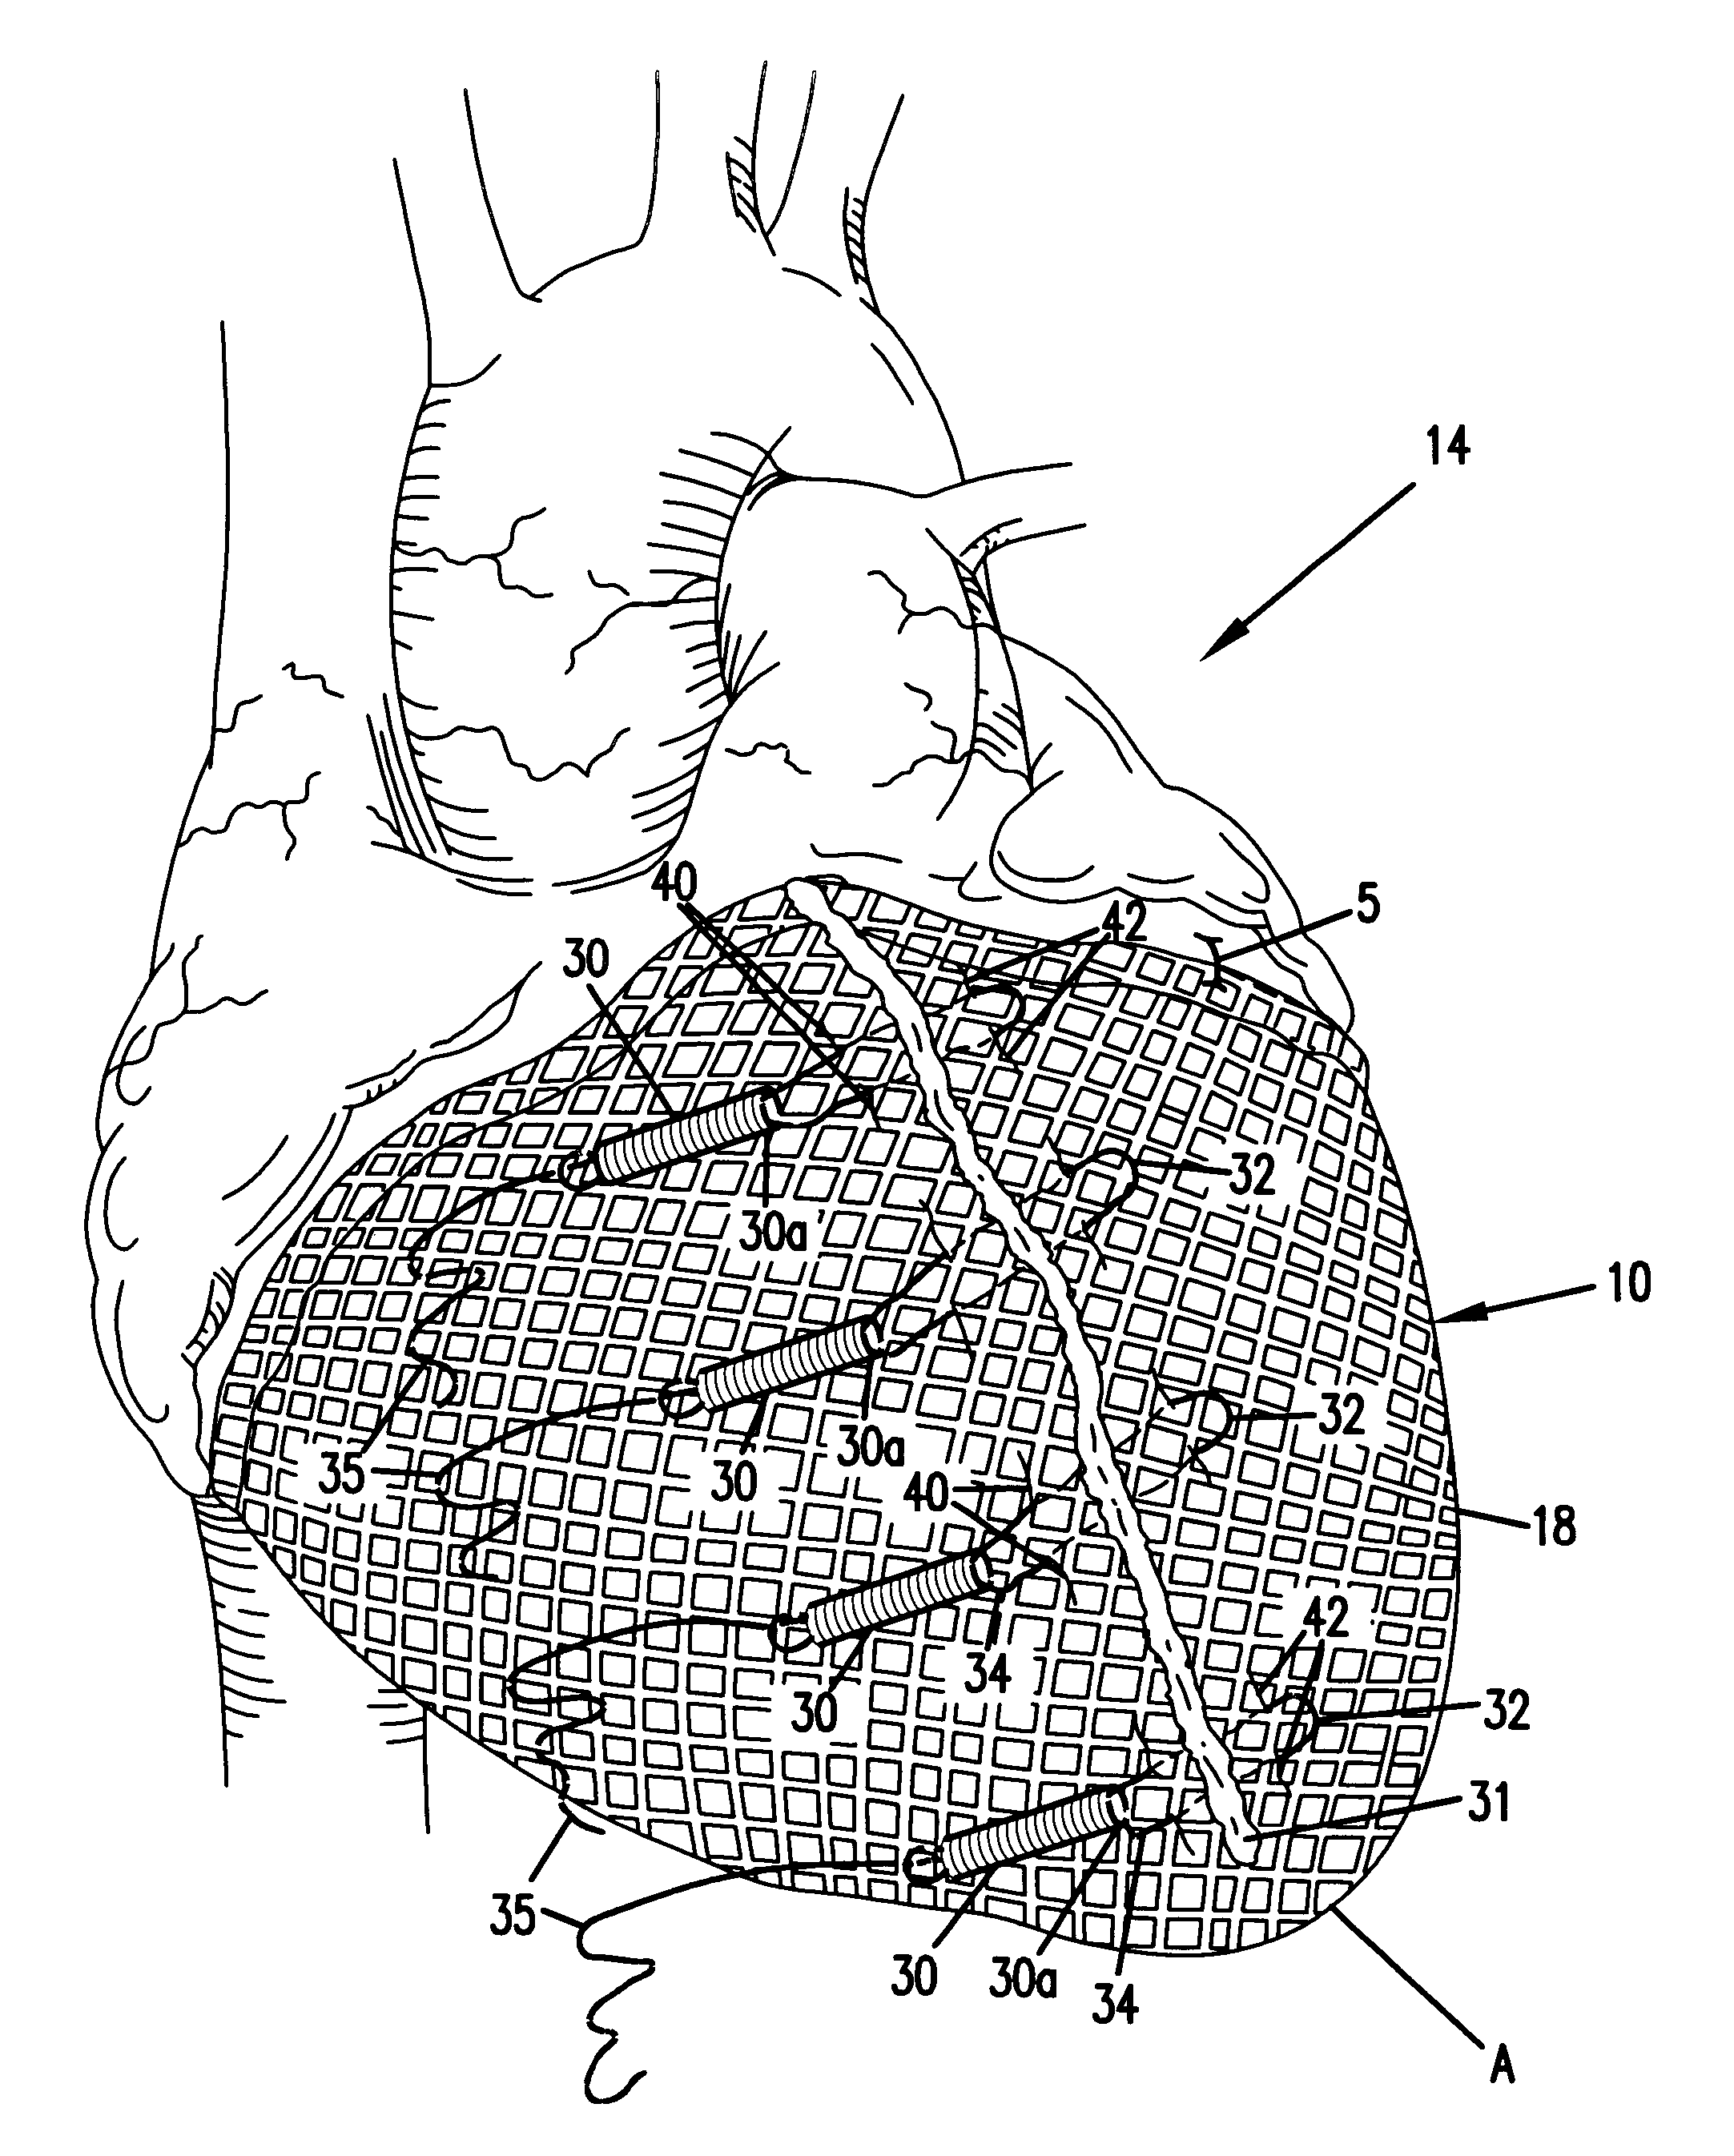 Cardiac constraint with draw string tensioning